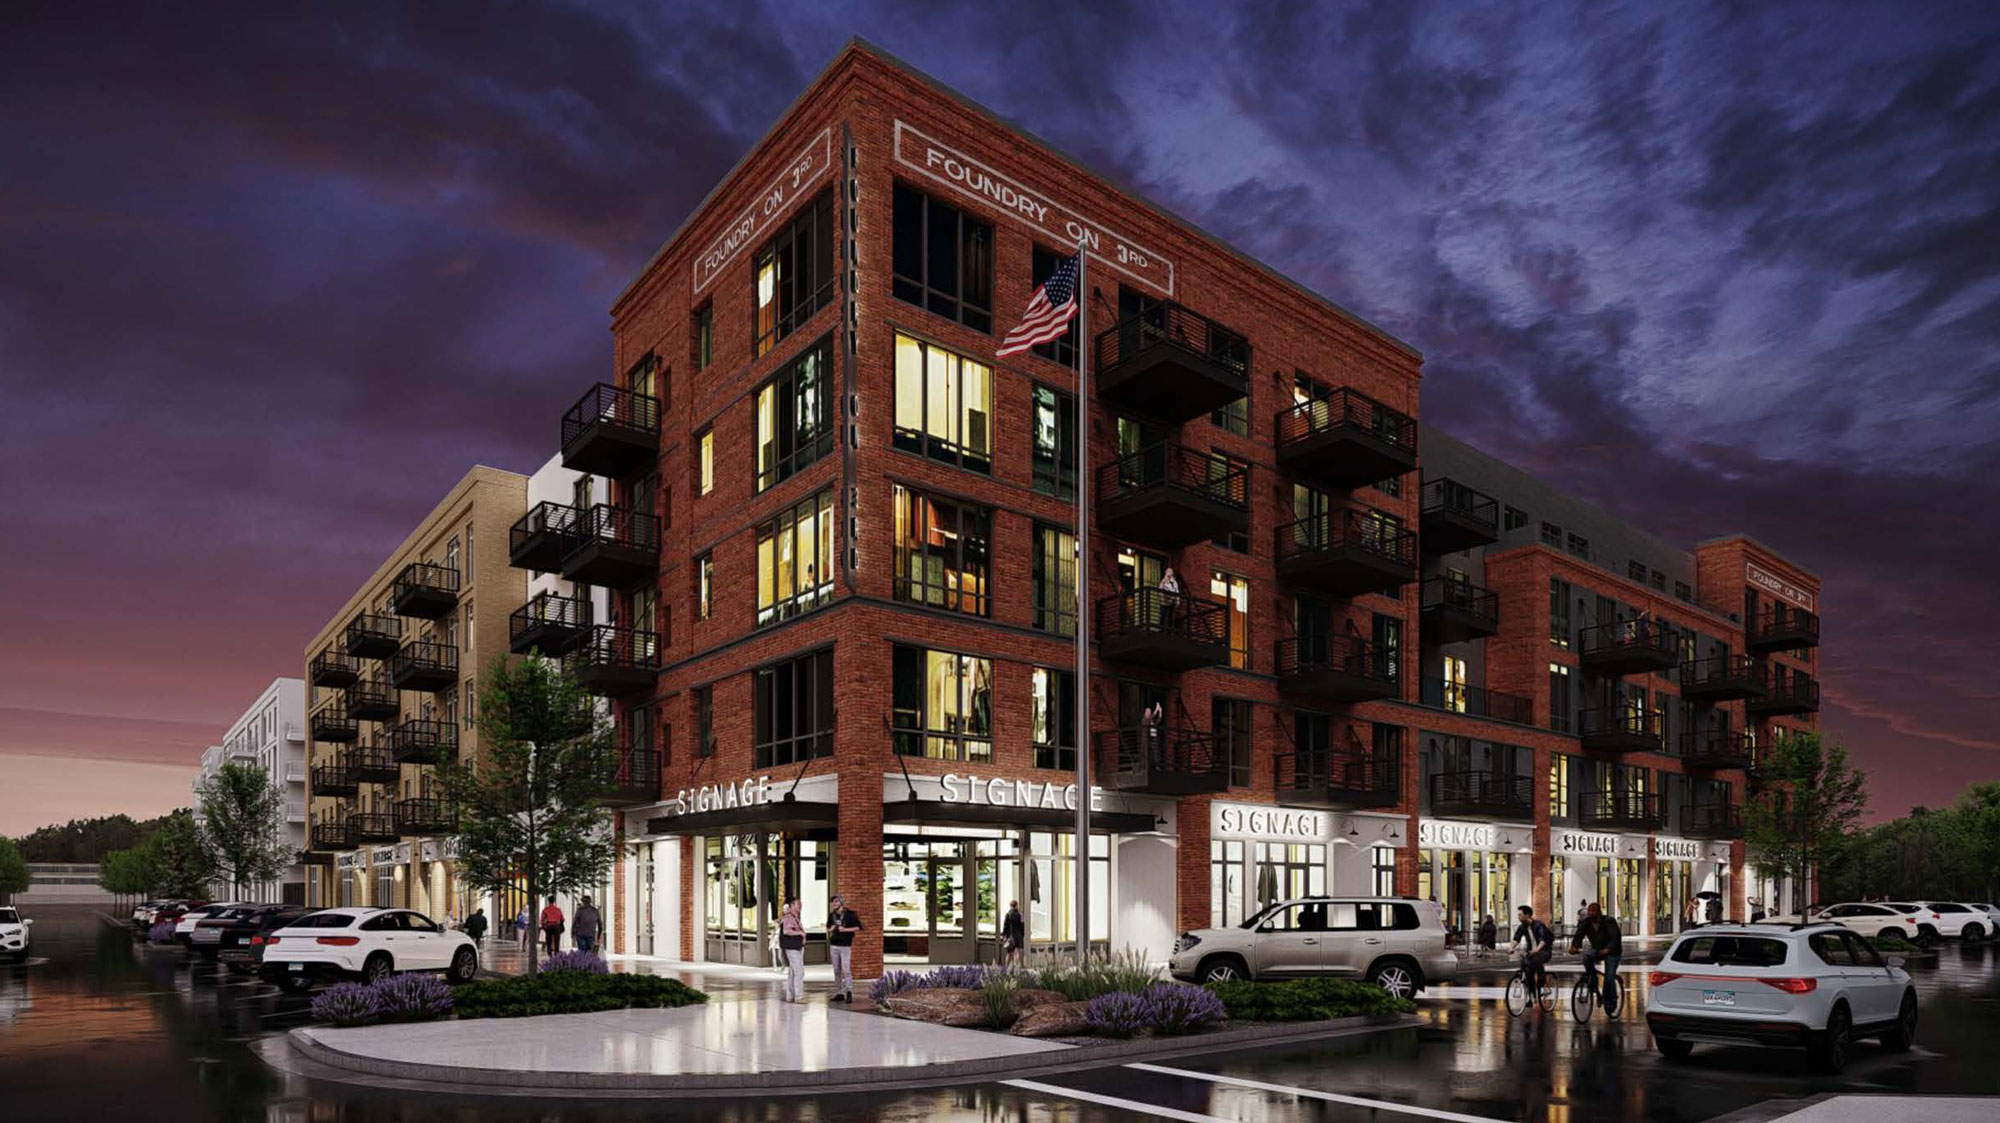 Exterior facade at night | The Foundry on 3rd in Wausau, WI | multifamily architecture by JLA Architects